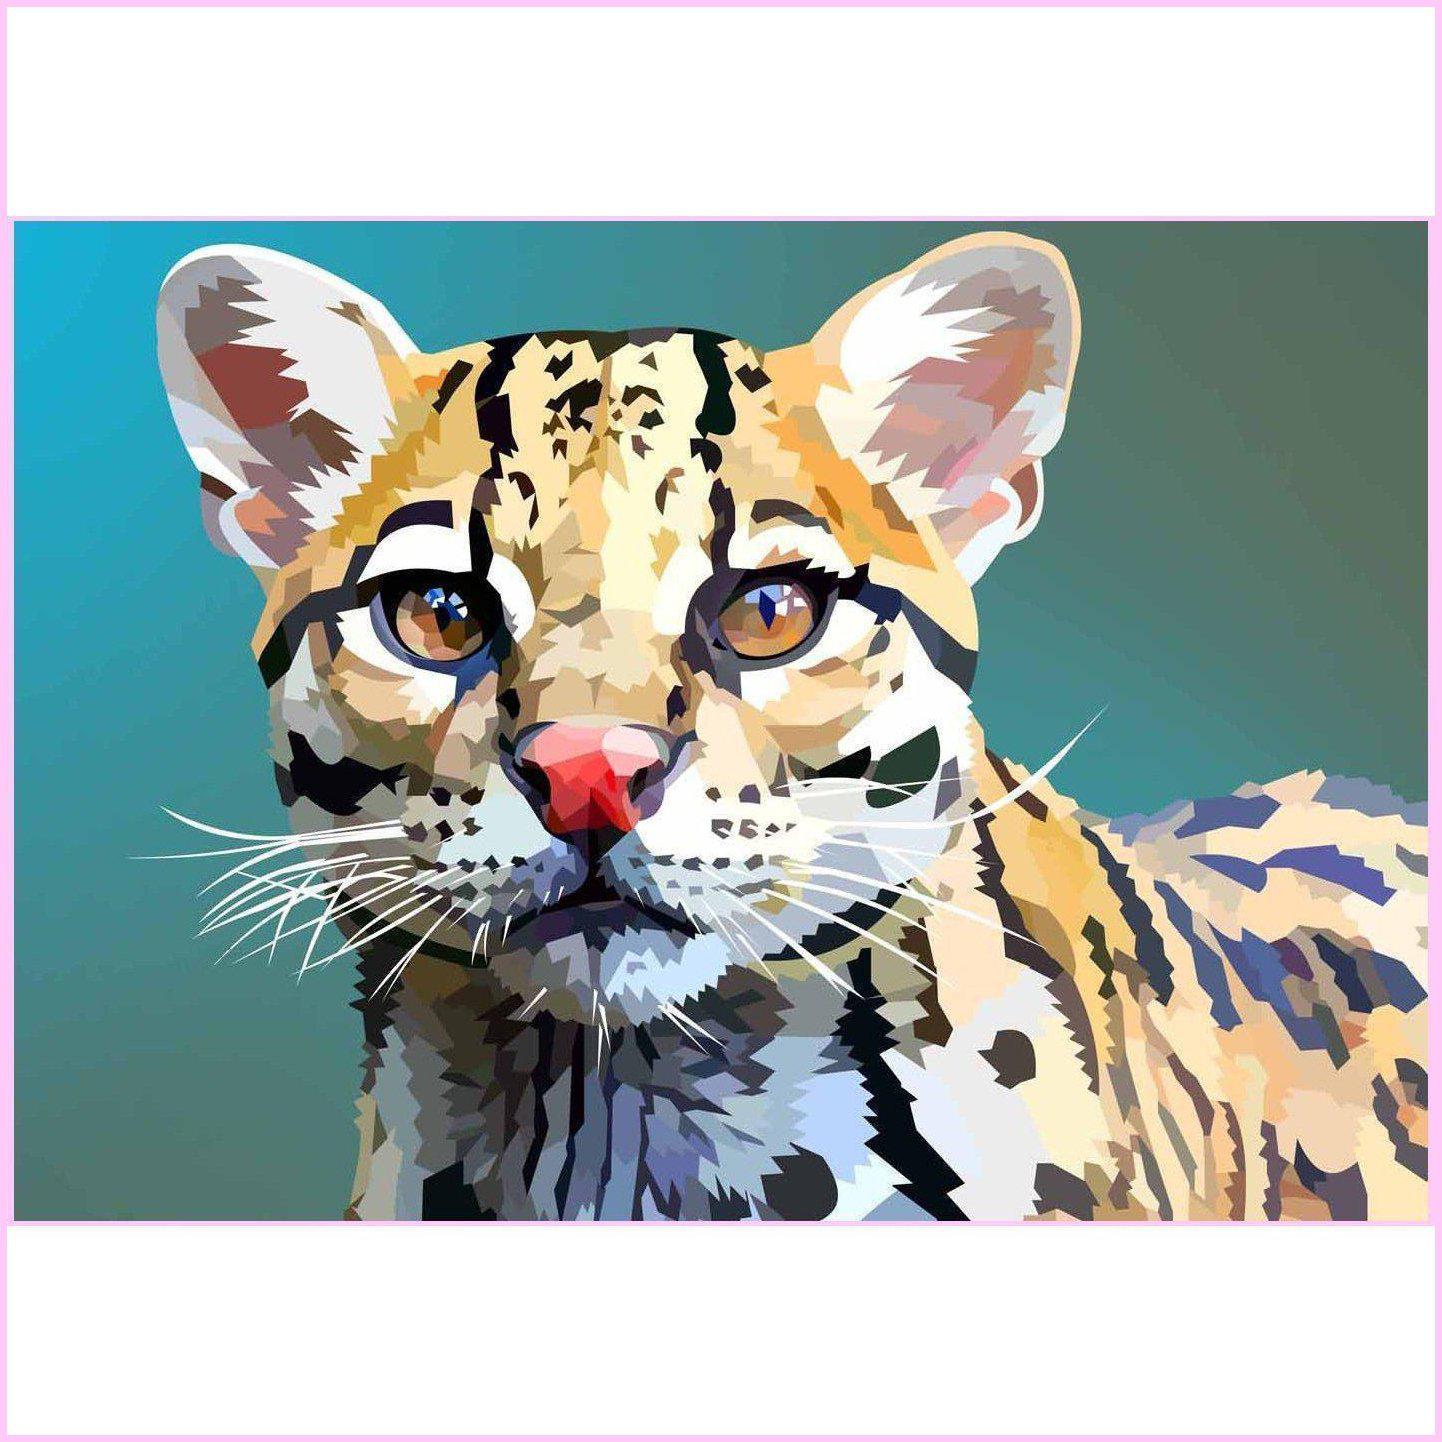 https://cdn.shopify.com/s/files/1/2529/5140/products/dreamy-ocelot-diamond-painting-kit-ytg-official-store-35x50cm-14x20-in-square_6a911788-69a8-42a2-97da-4cb748e09eb5.jpg?v=1689926009&width=2884